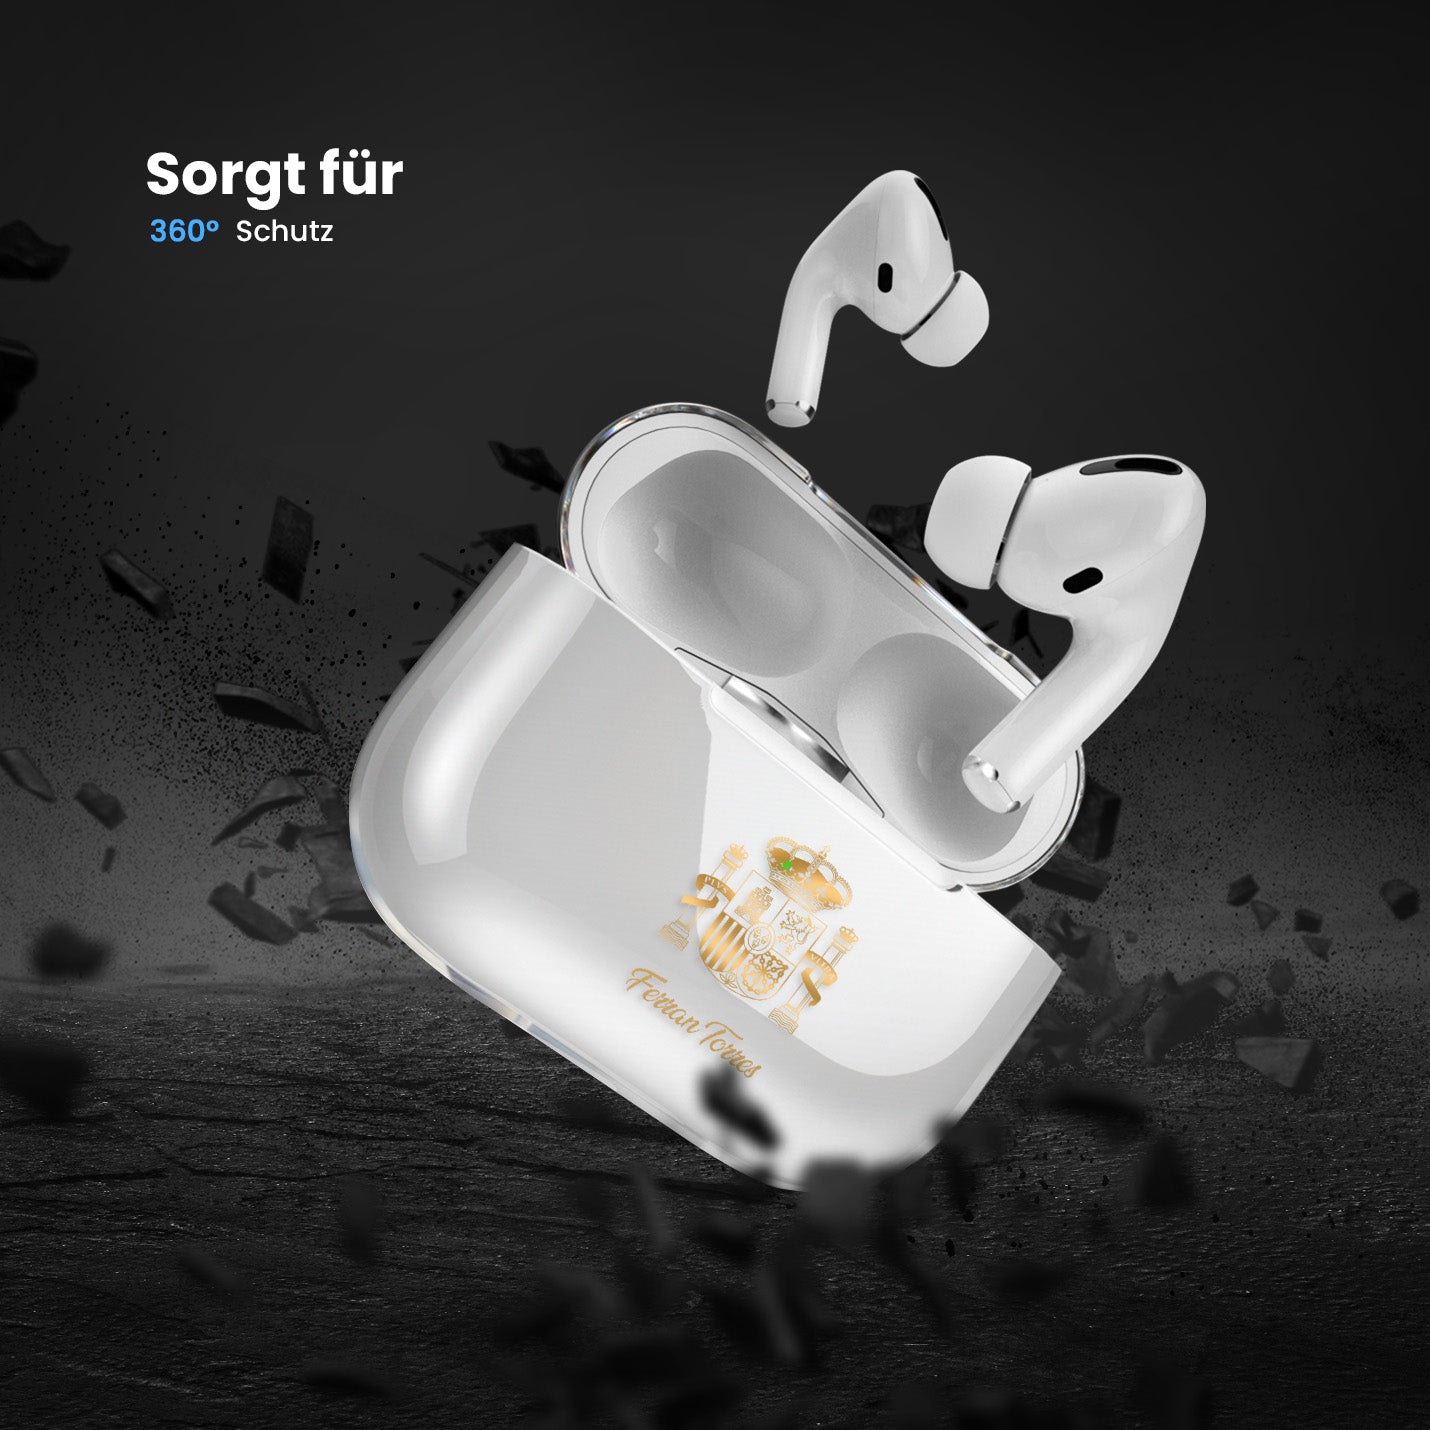 Airpods Hülle - Spanien - 1instaphone